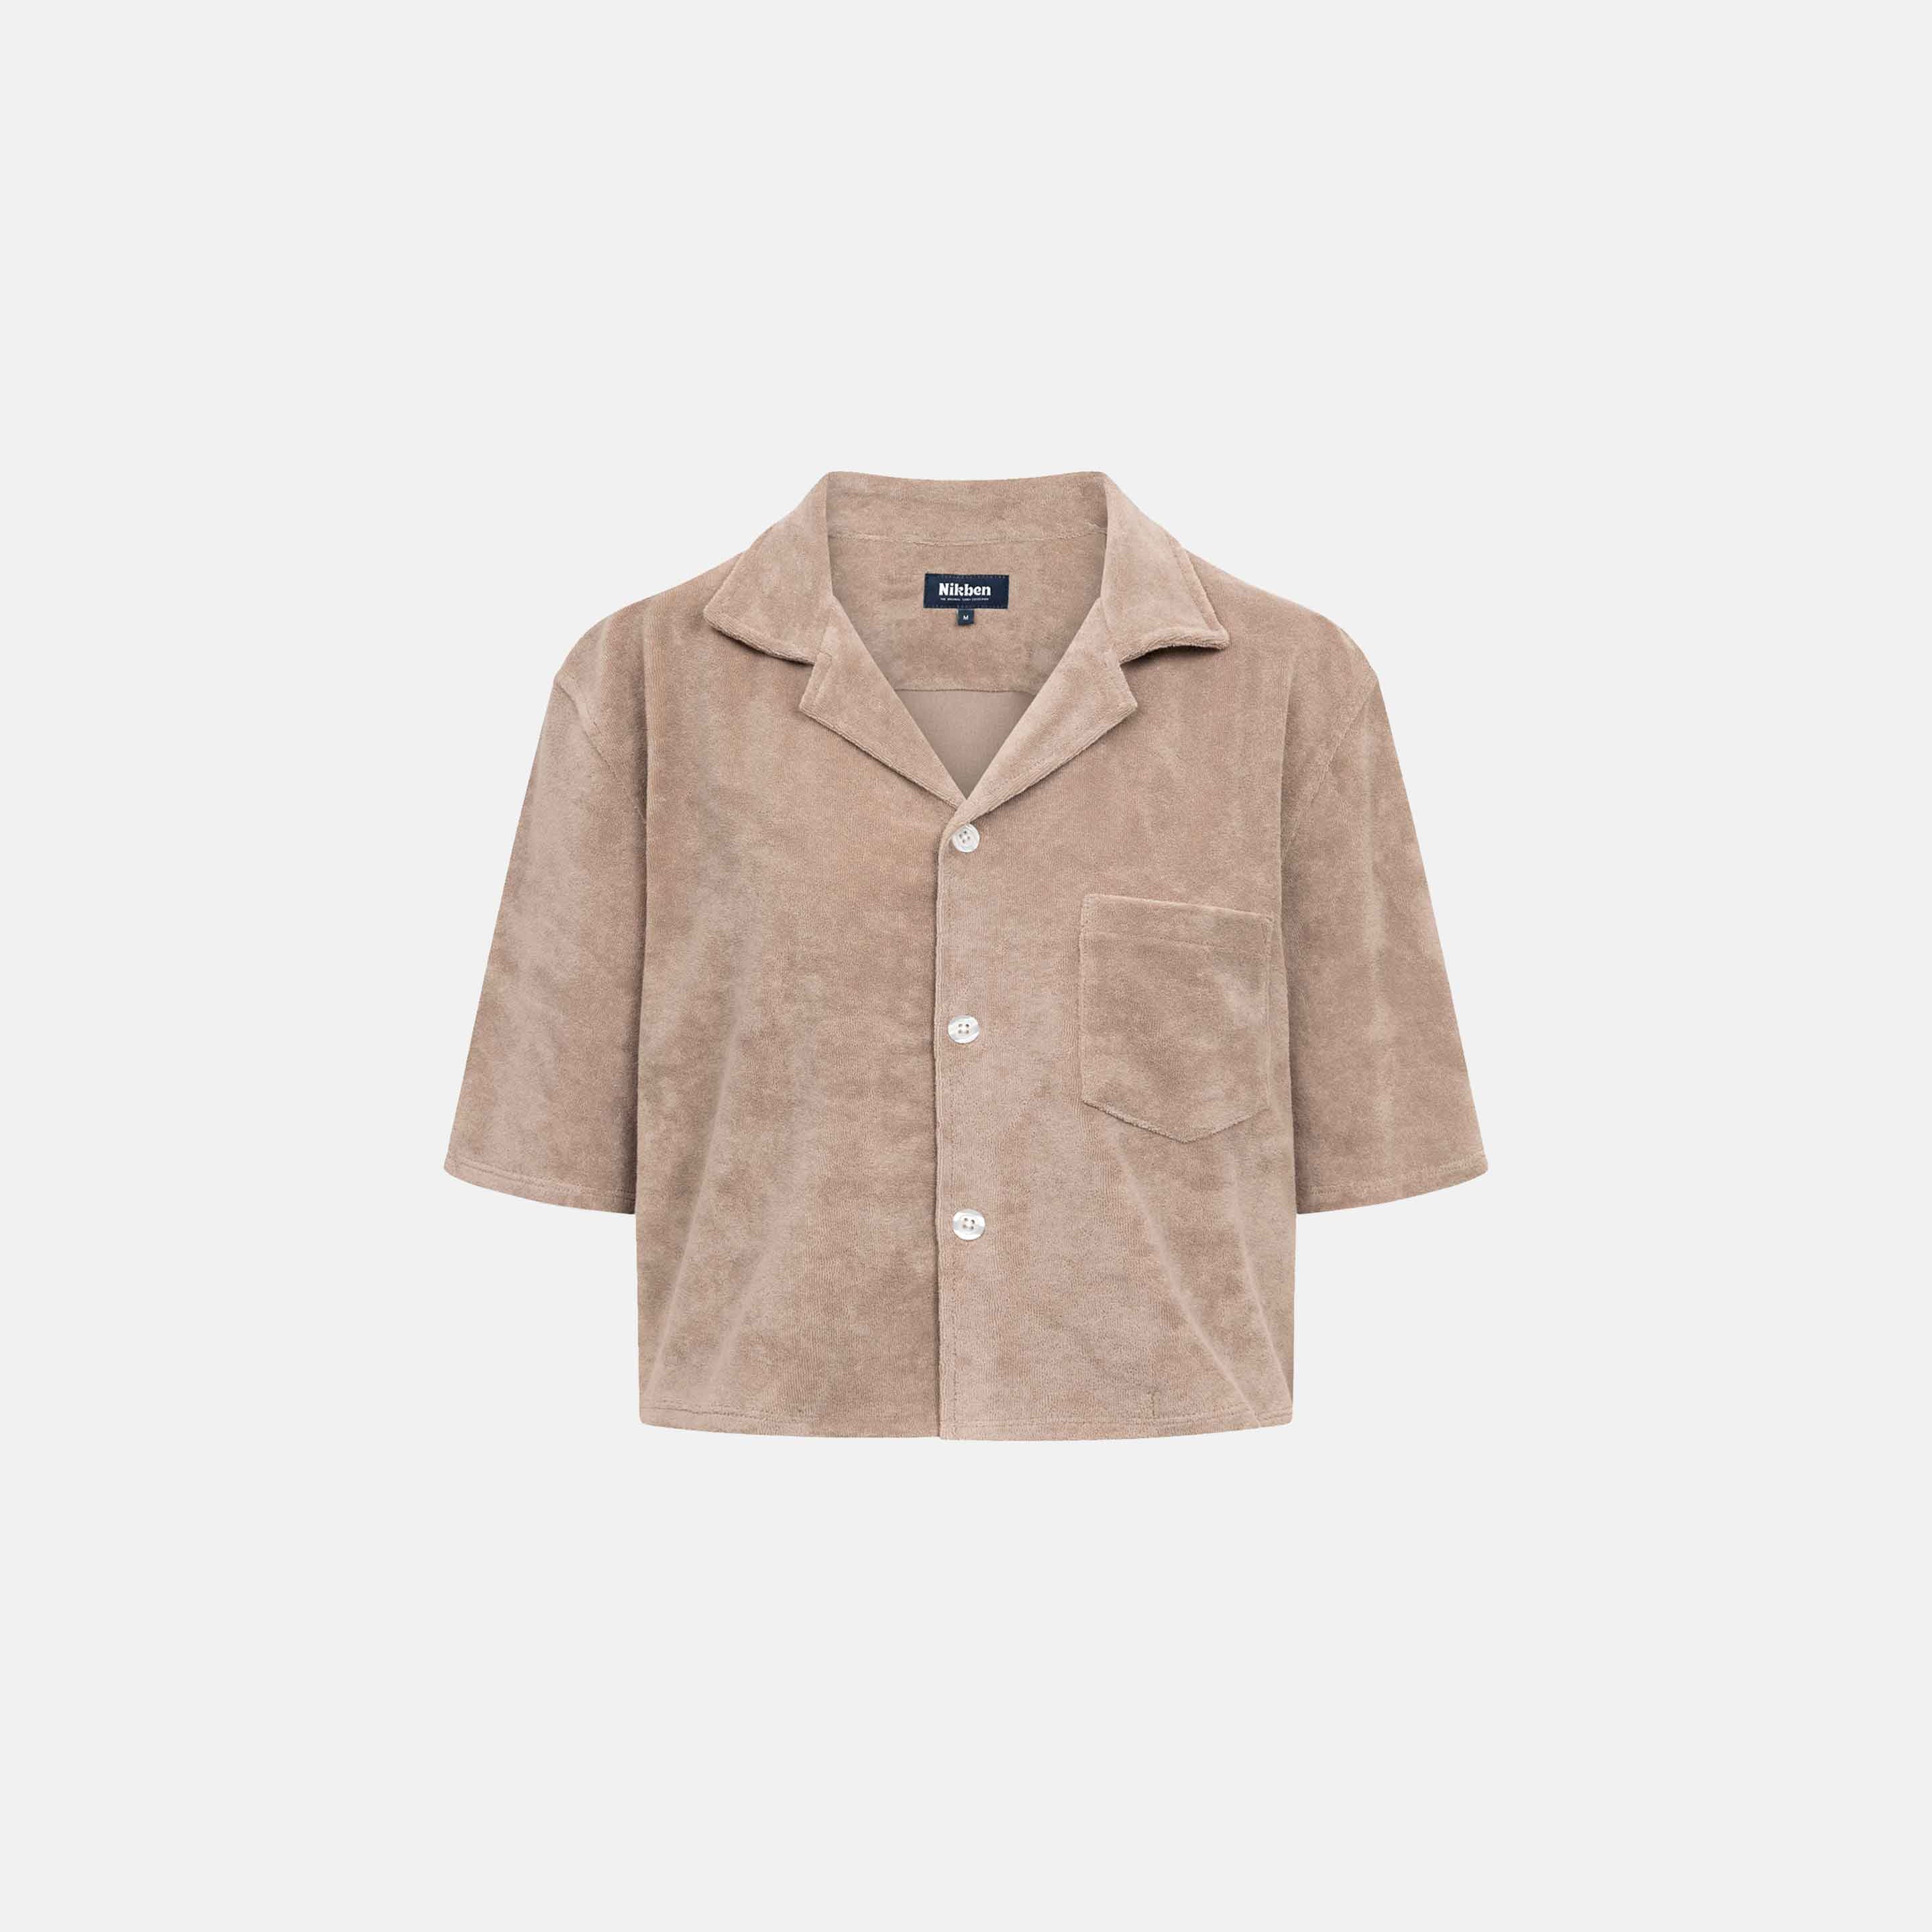 Light brown, short sleeve, cropped shirt with white button closure and one chest pocket